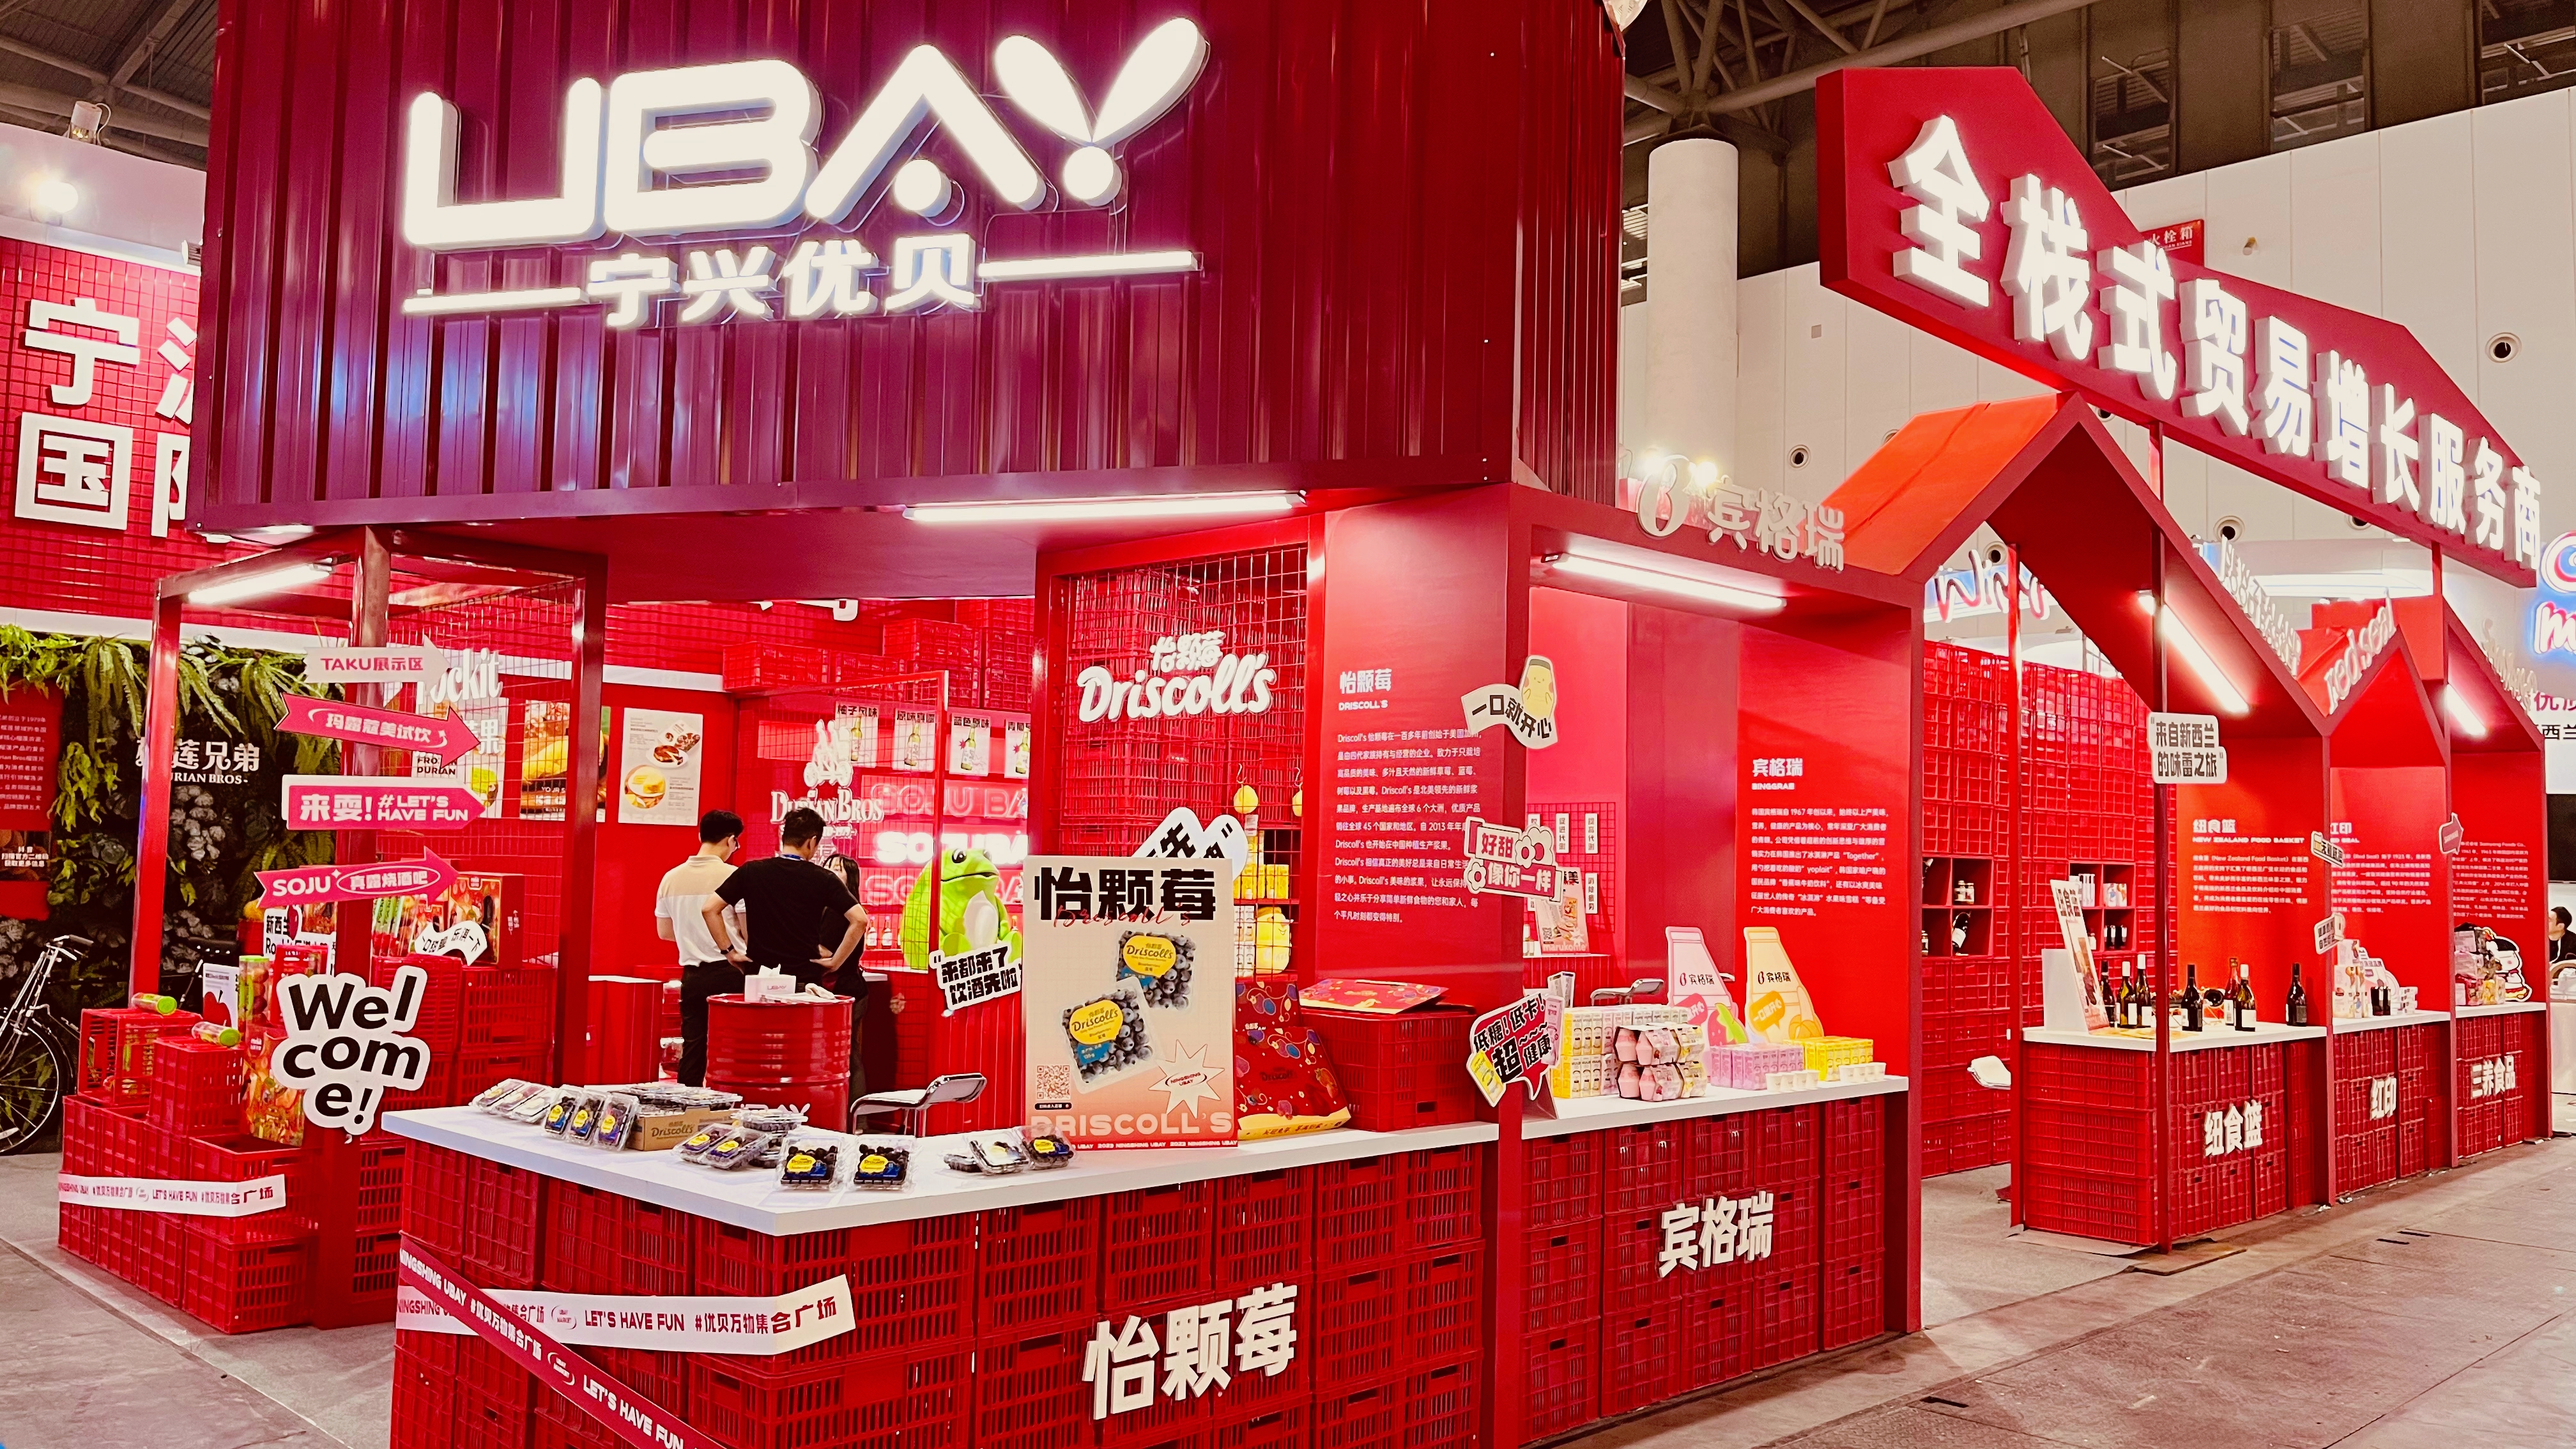 Embracing the Spring Spirit: Ningshing Ubay Showcases 11 Brands at Chengdu Sugar and Alcohol Fair, Inviting Attendees to a Springtime Celebration